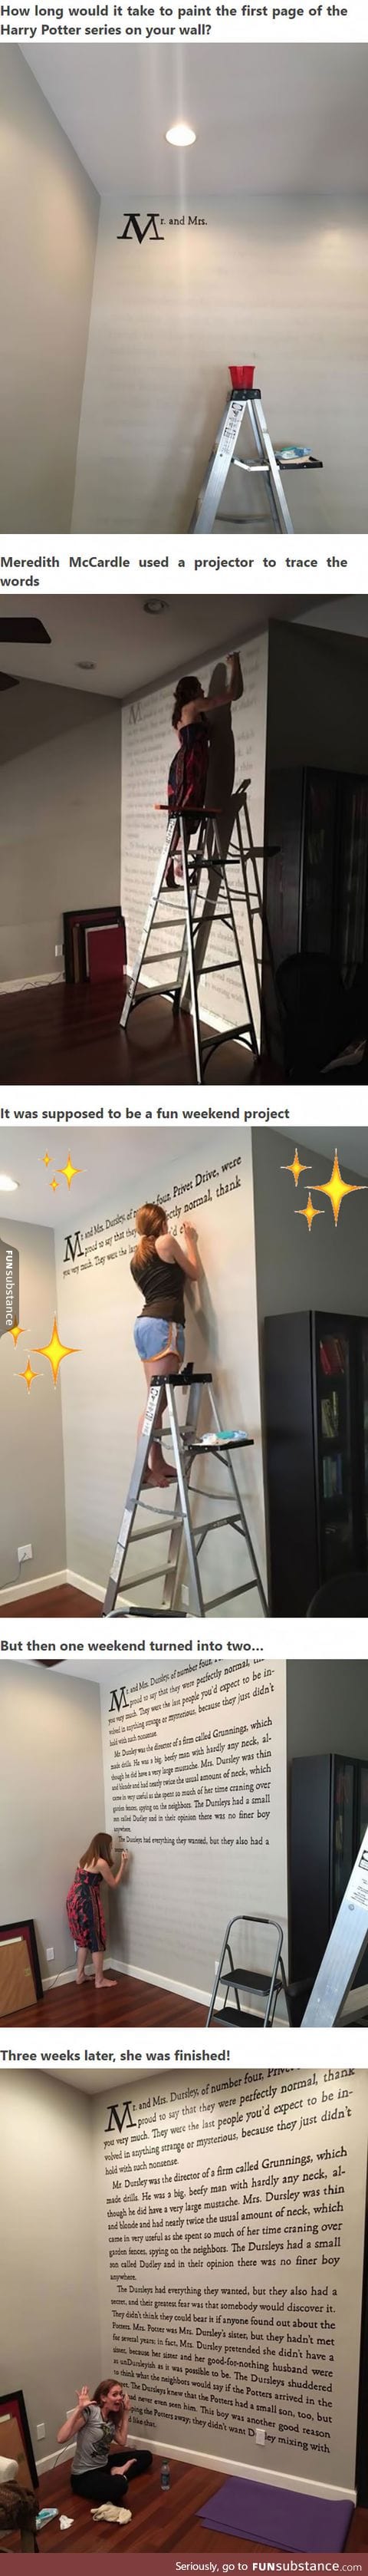 A Harry Potter Fan Paints First Page Of “Sorcerer’s Stone” Onto Her Wall